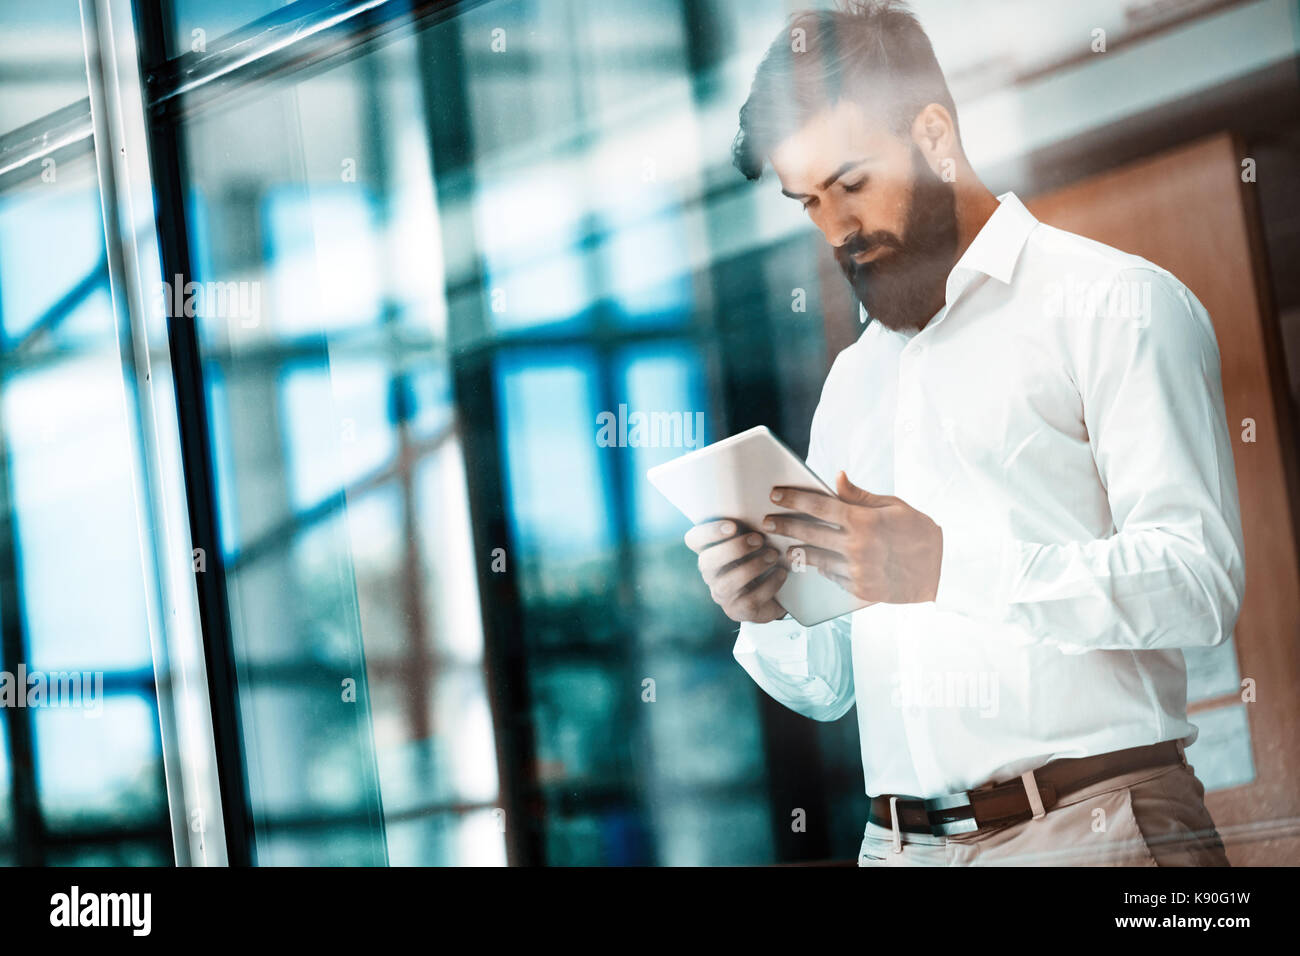 Handsome young businessman using his digital tablet Stock Photo